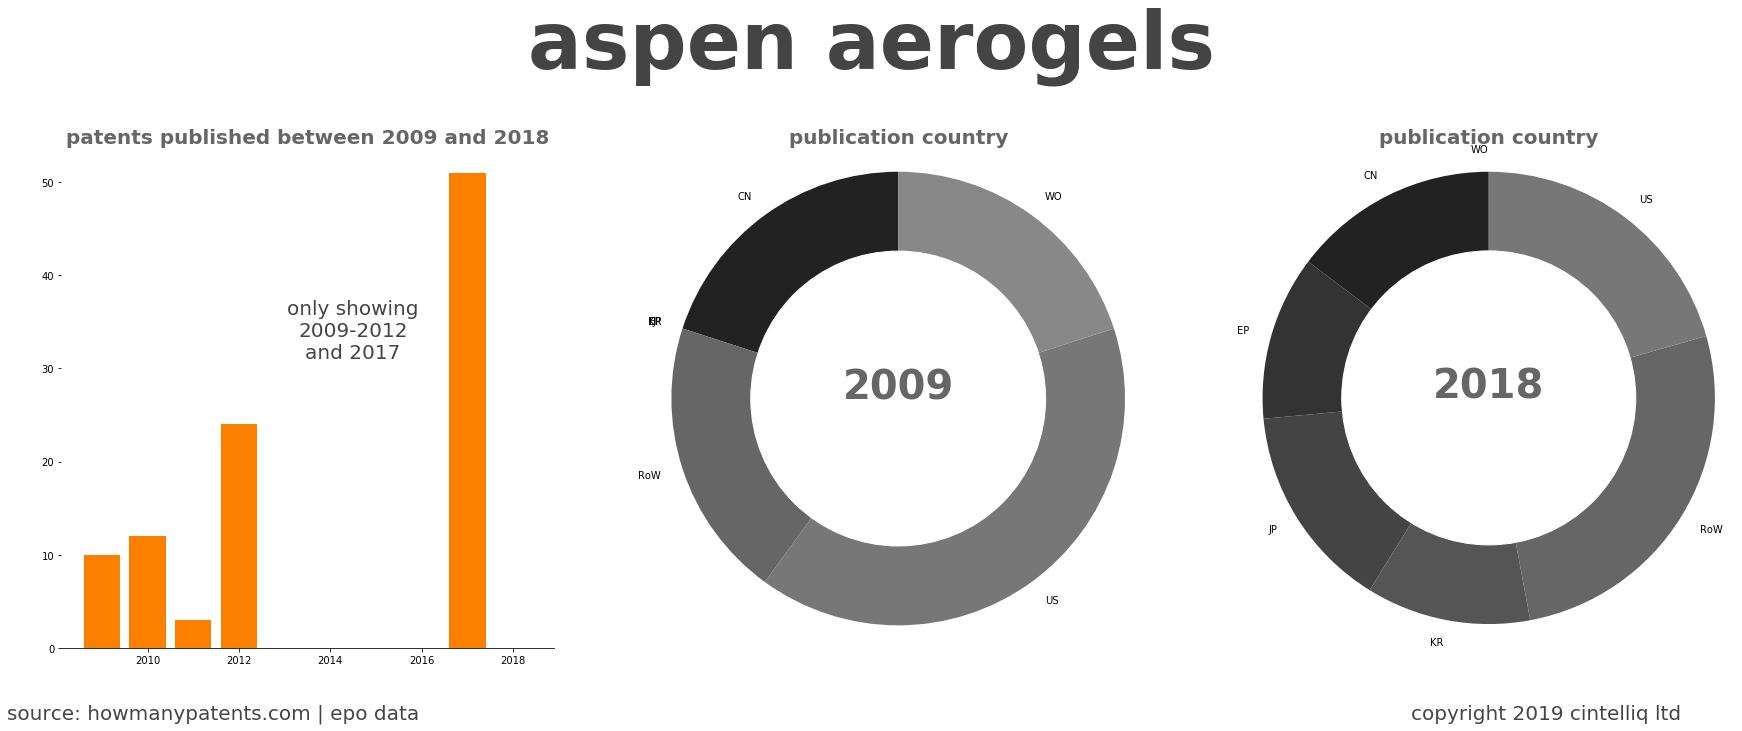 summary of patents for Aspen Aerogels